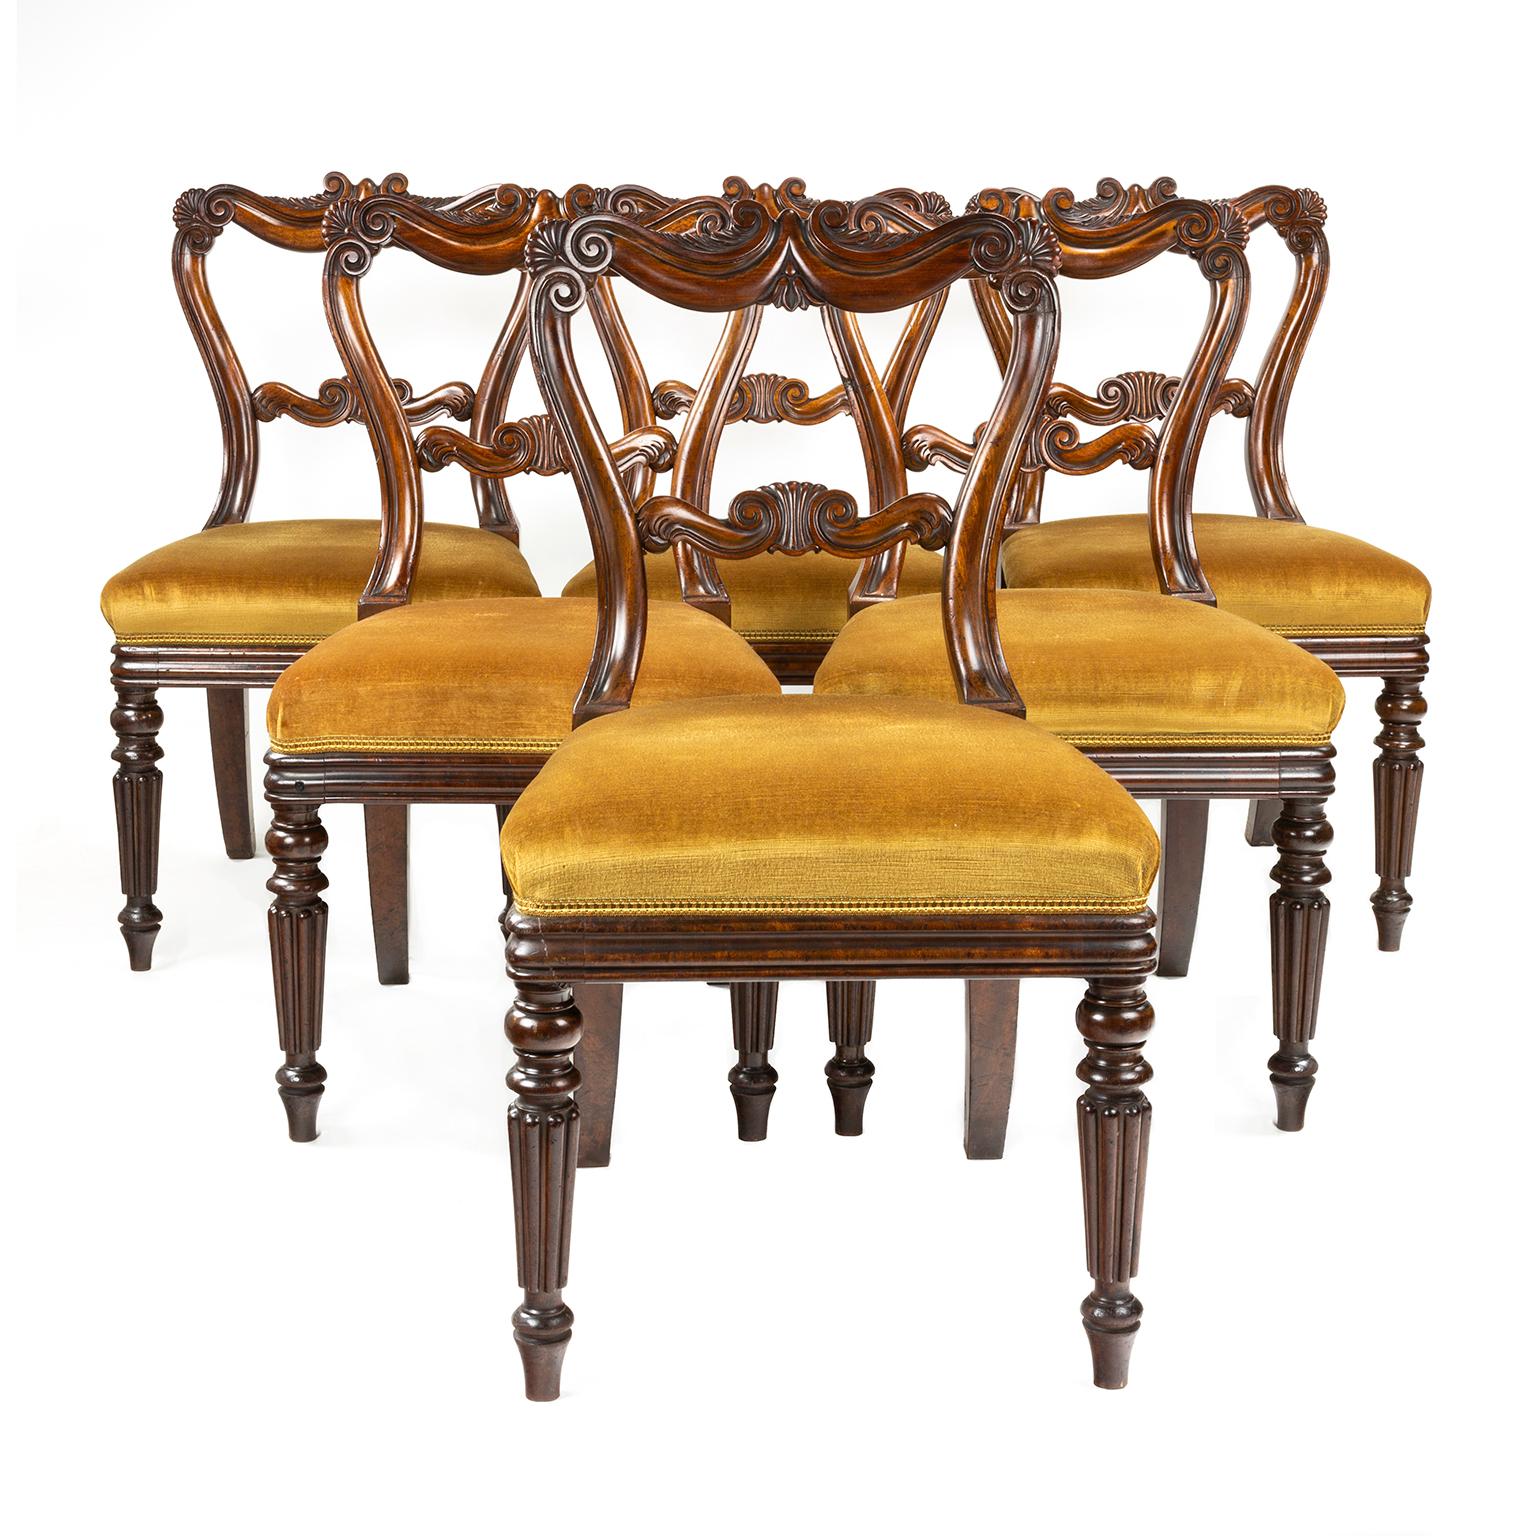 A fine set of six regency rosewood side or dining chairs by Gillow of Lancaster and London.

Gillows of Lancaster and London, also known as Gillow & Co., was an English furniture making firm based in Lancaster, Lancashire, and in London. It was